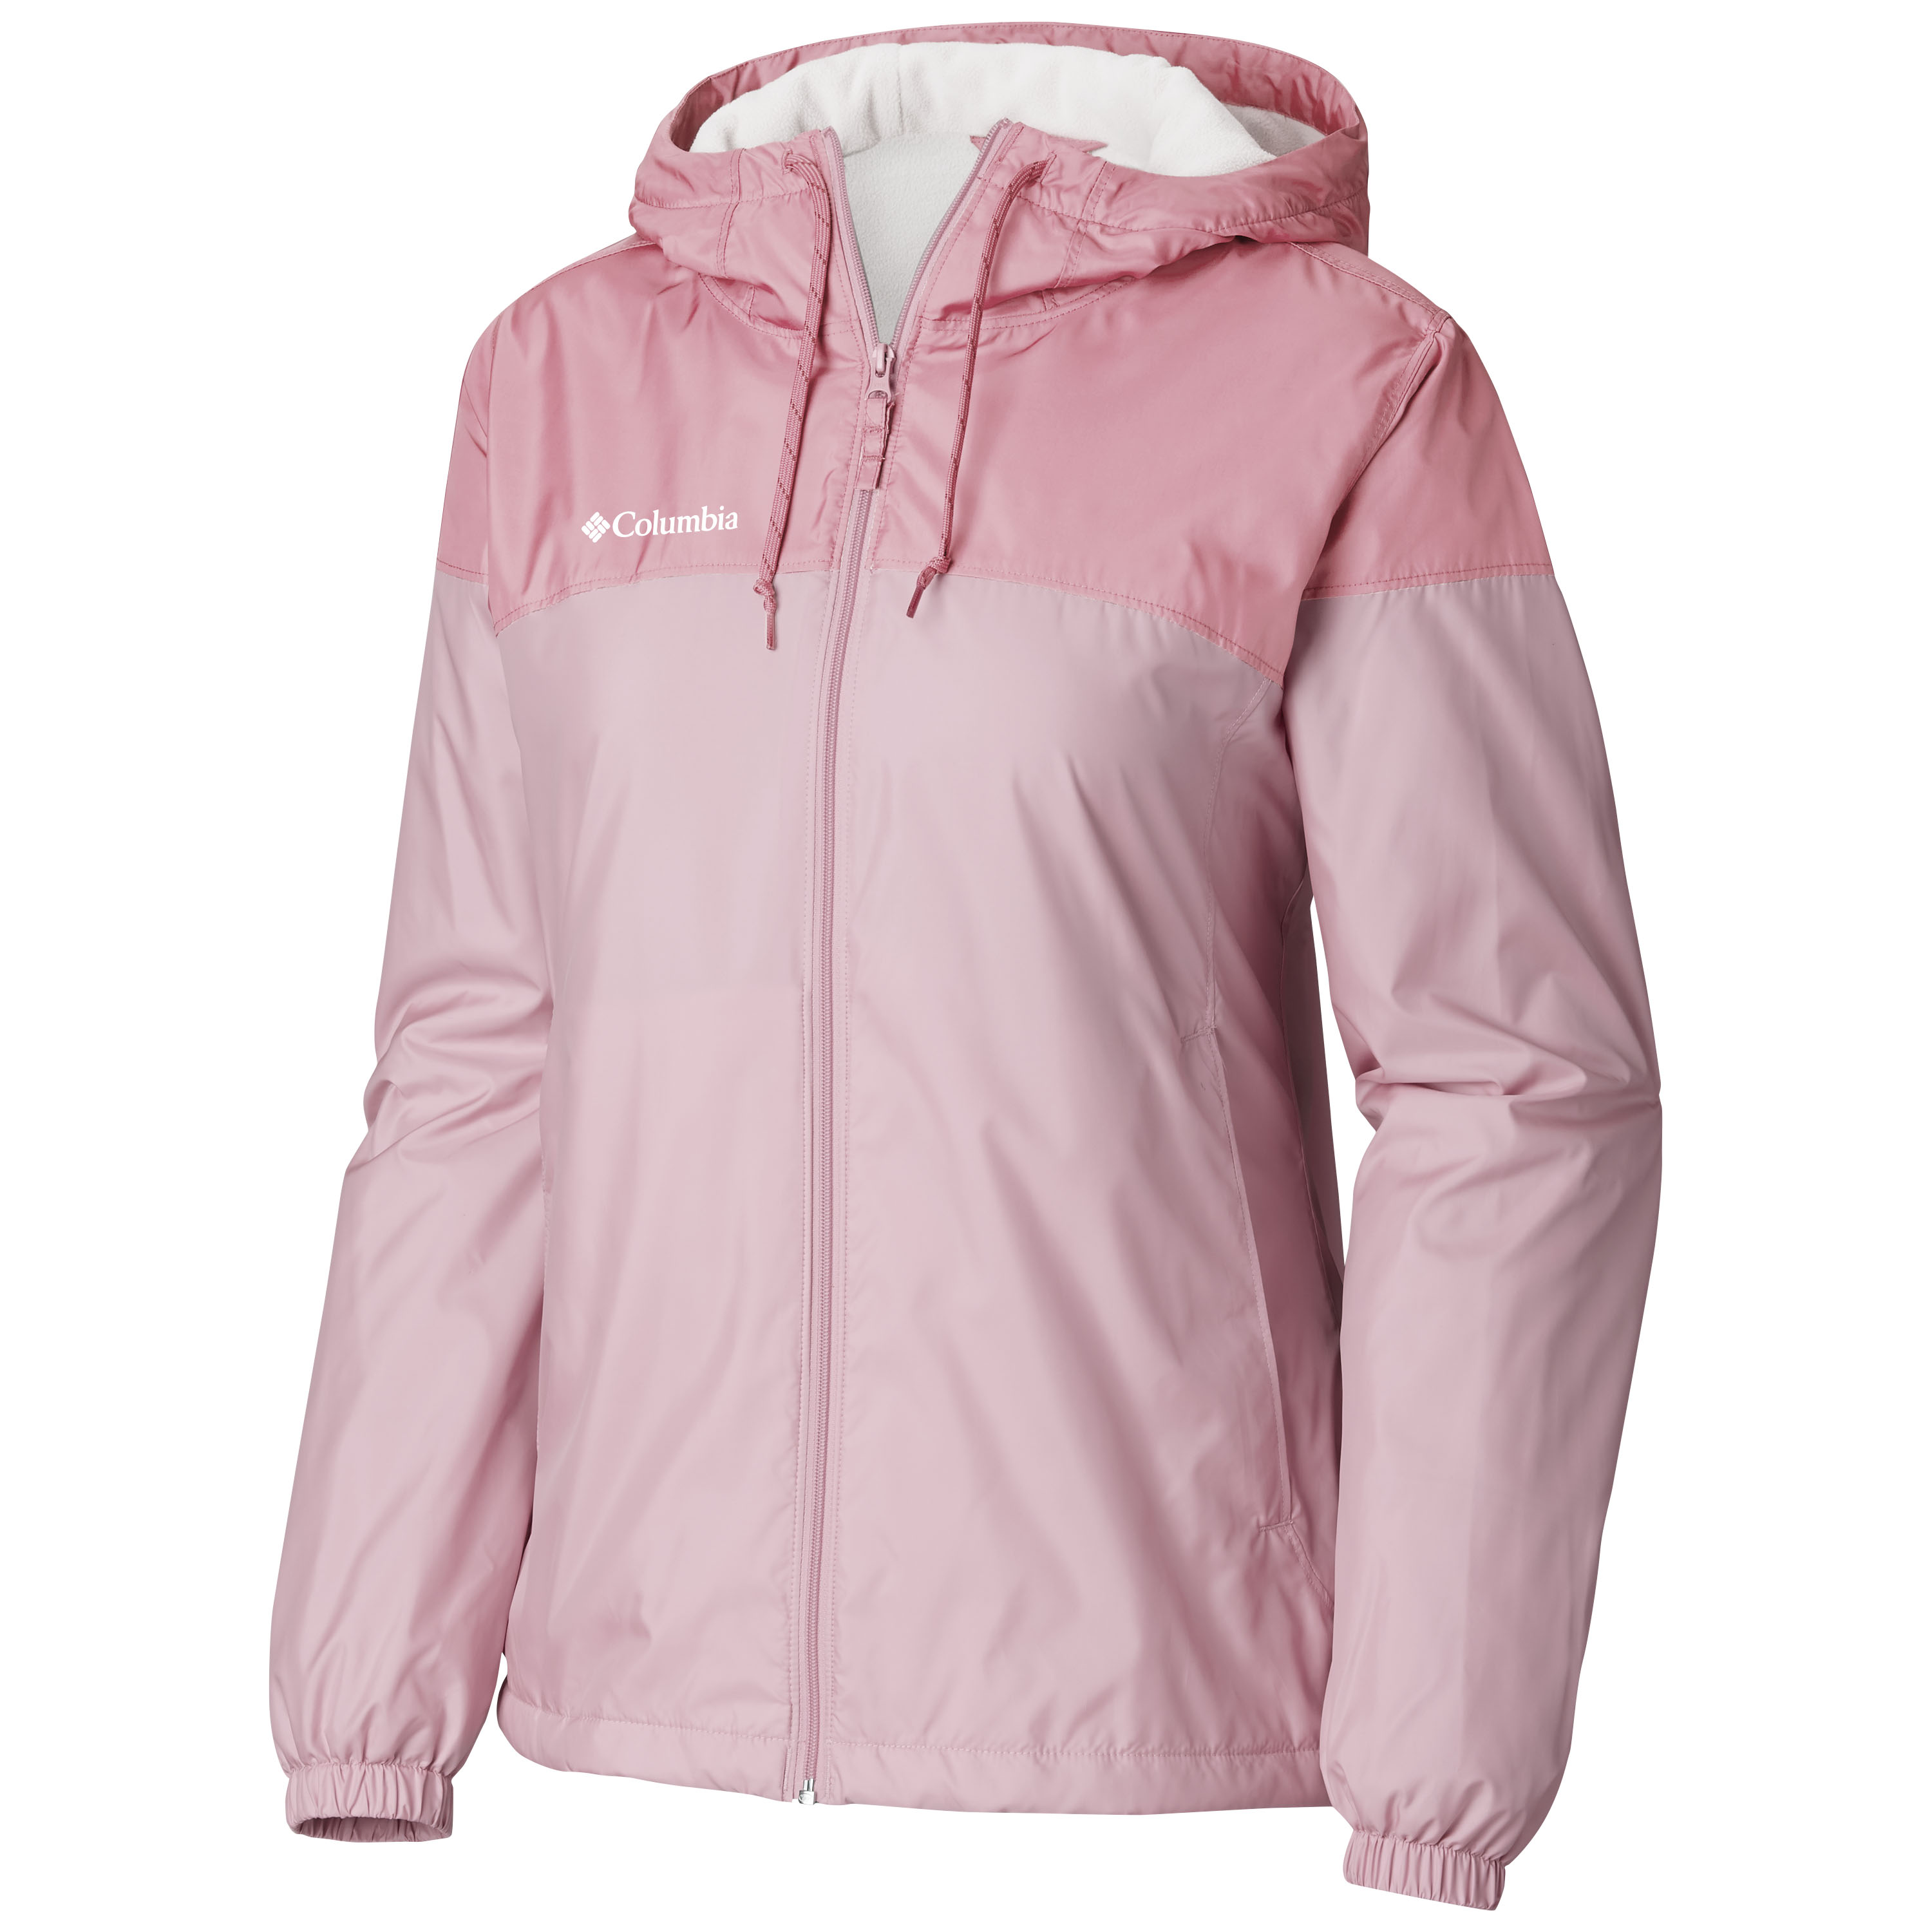 Columbia Flash Forward Lined - Women's Review